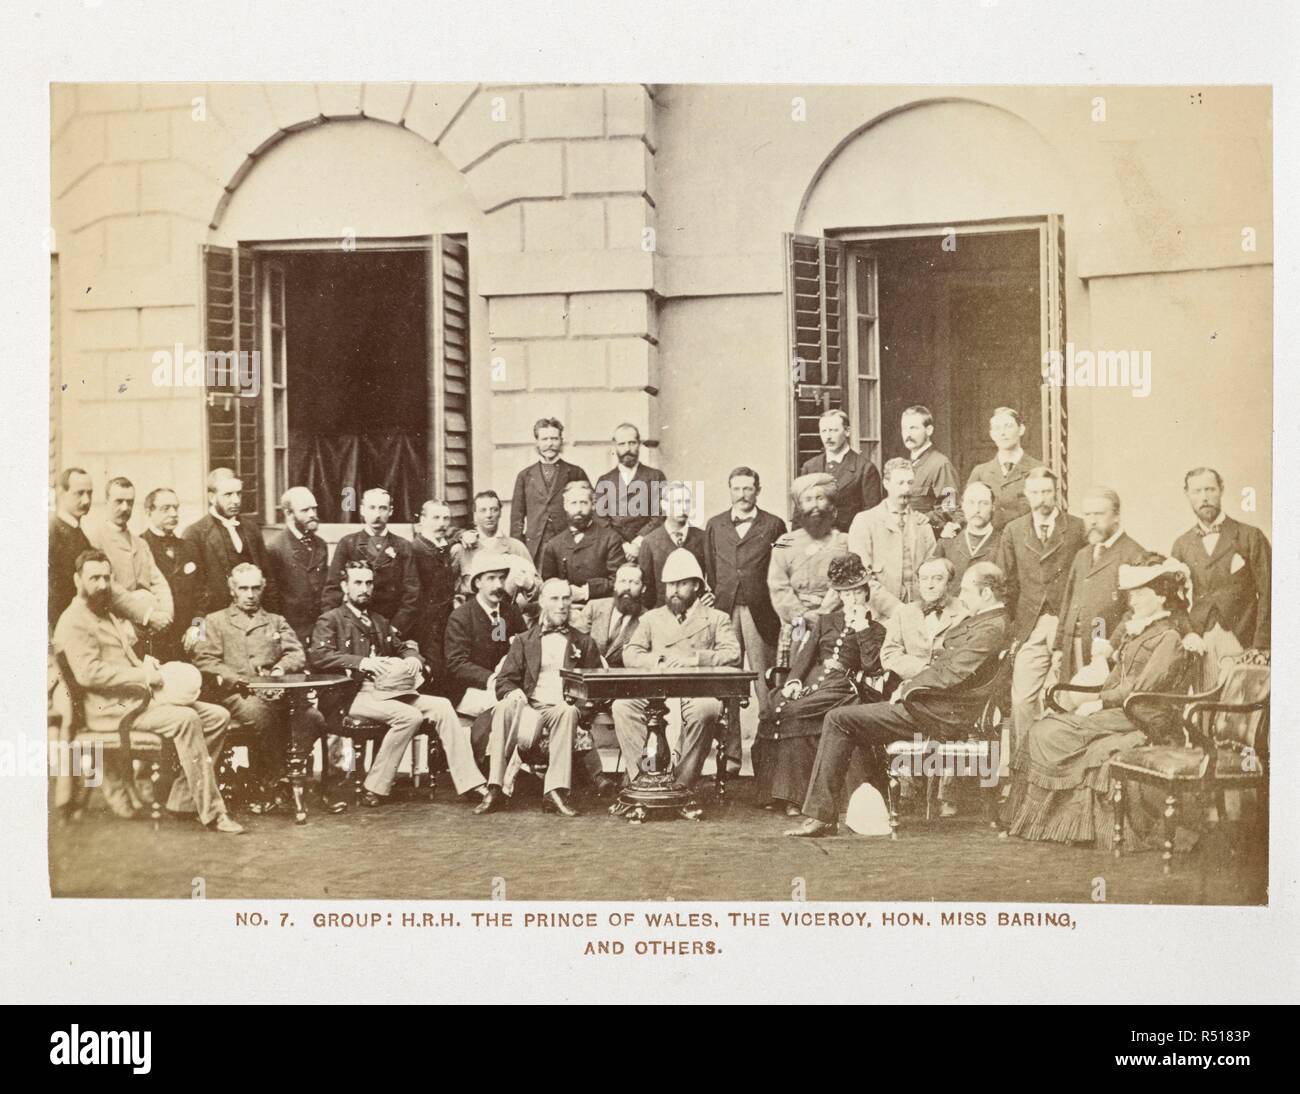 Group: H.R.H. The Prince of Wales, the Viceroy, Hon. Miss Baring and others [at Government House, Calcutta]. Group portrait: 'The Prince will at once be recognised in this capital photograph. His Royal Highness, the only person in the group not uncovered, has Lord Northbrook on his right and Miss Baring on his left. Prince Louis of Battenberg is sitting next to Lord Northbrook, Lord Suffield just behind, and Sir Henry Norman behind him. The Prince's suite are chiefly to the left of the picture, the Indian officials to the right' . Bourne & Shepherd, 'Royal photographic album of scenes and pers Stock Photo